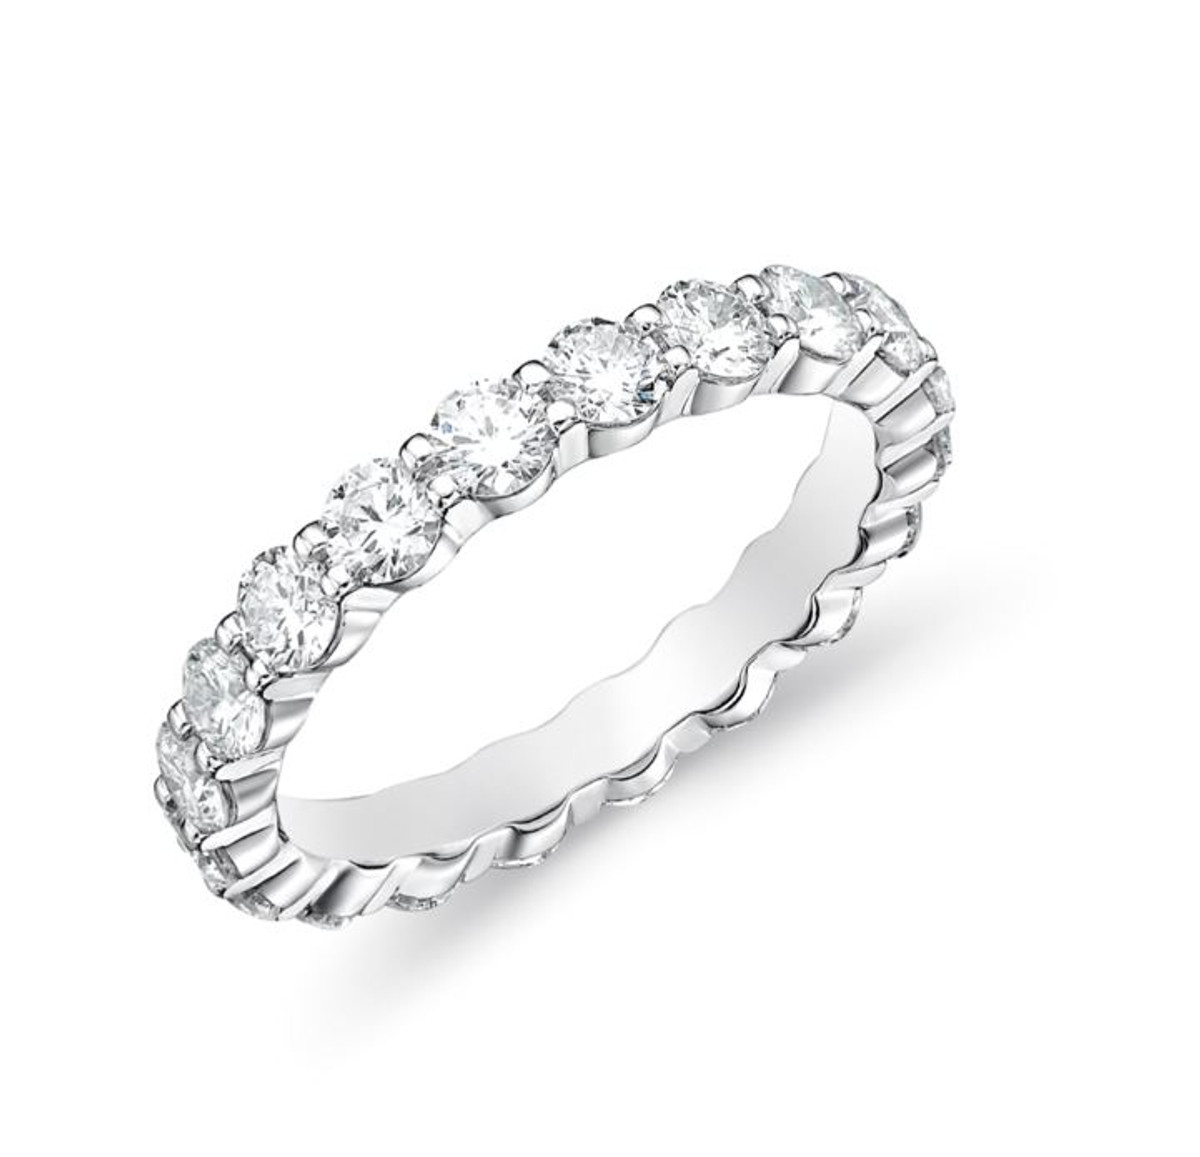 Hyde Collection 18K White Gold Petite Prong Diamond Eternity Band-30656